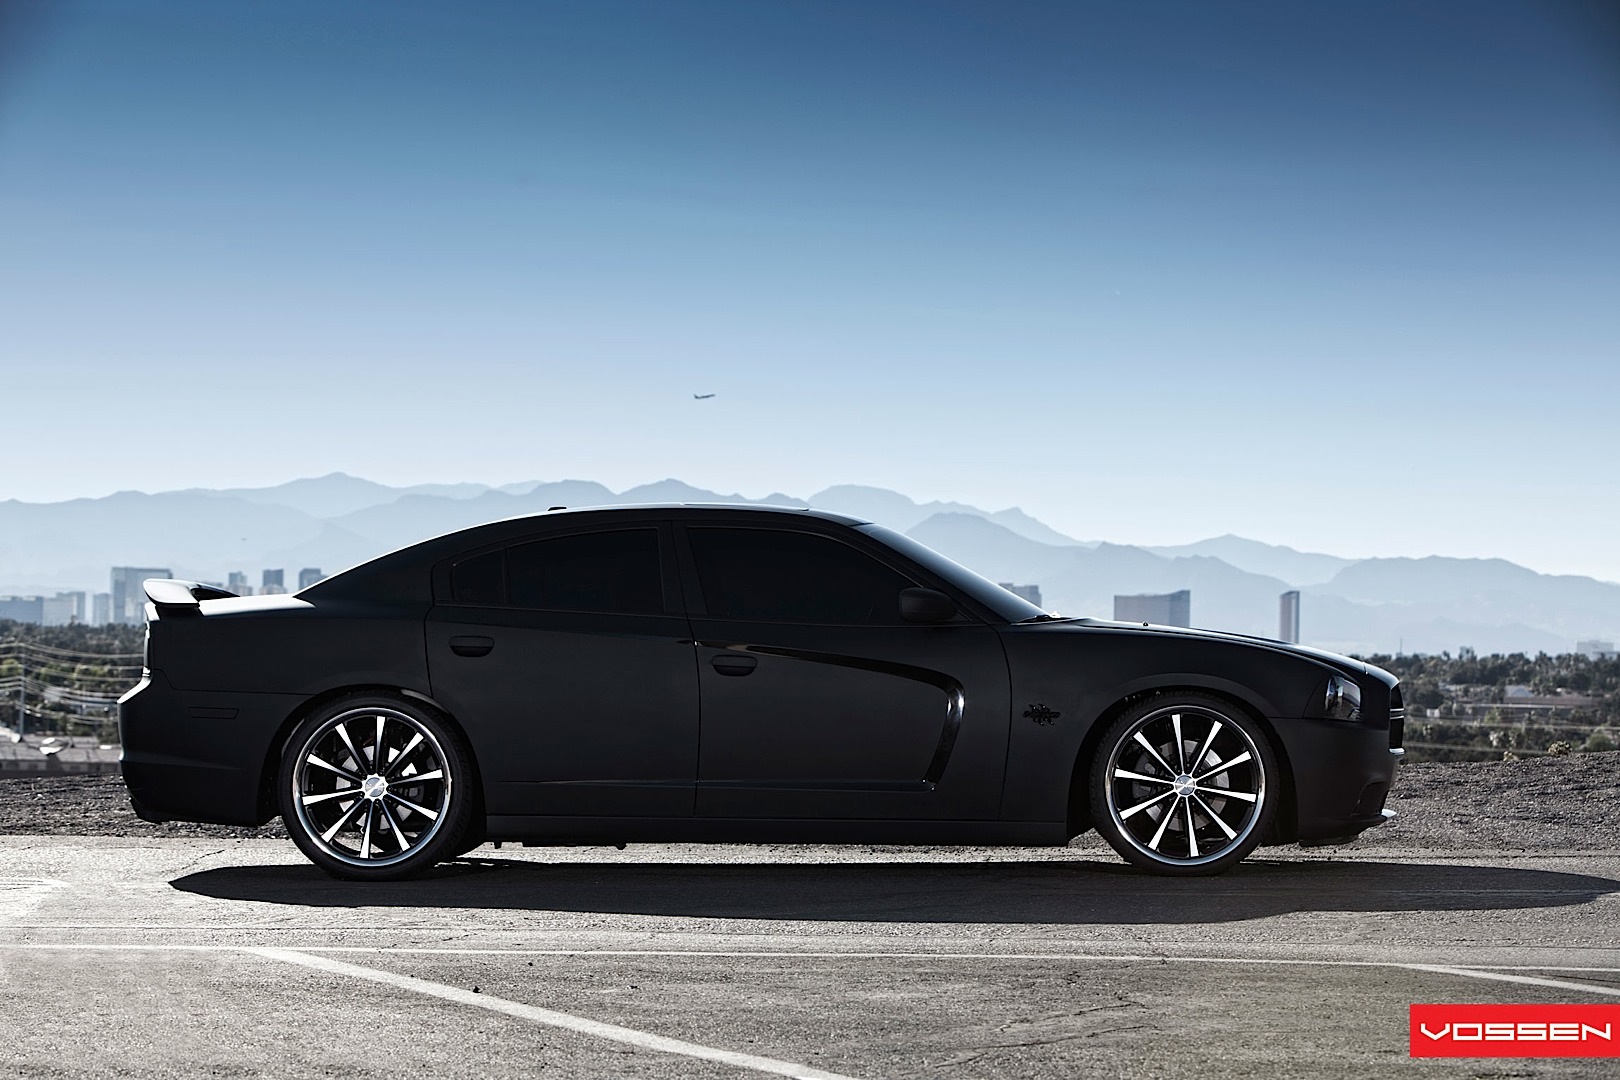 dodge-charger-gets-matte-black-wrap-and-vossen-wheels-photo-gallery_1.jpg